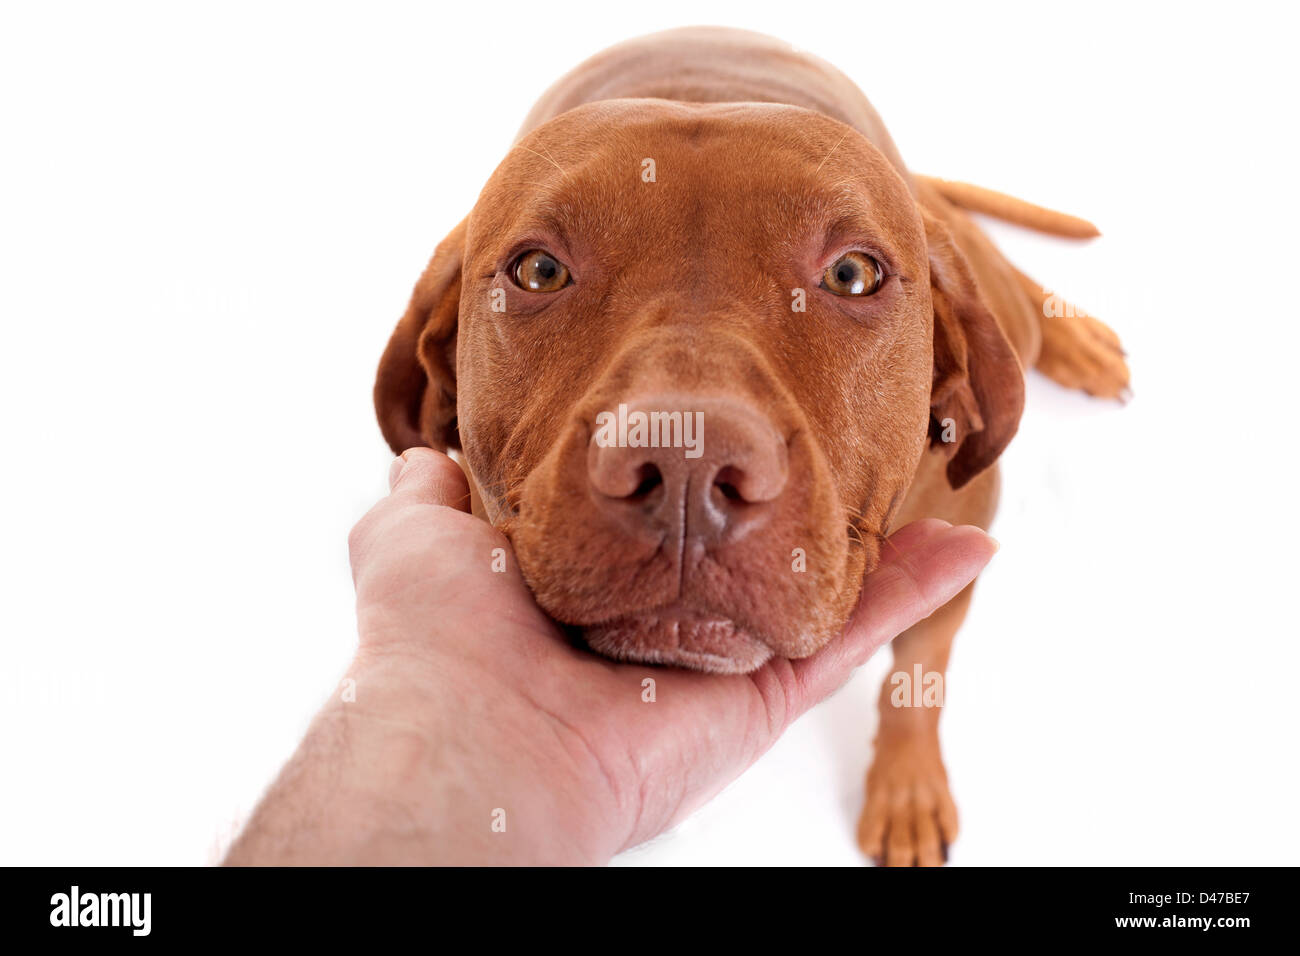 dog resting nose in human palm looking up to the person Stock Photo